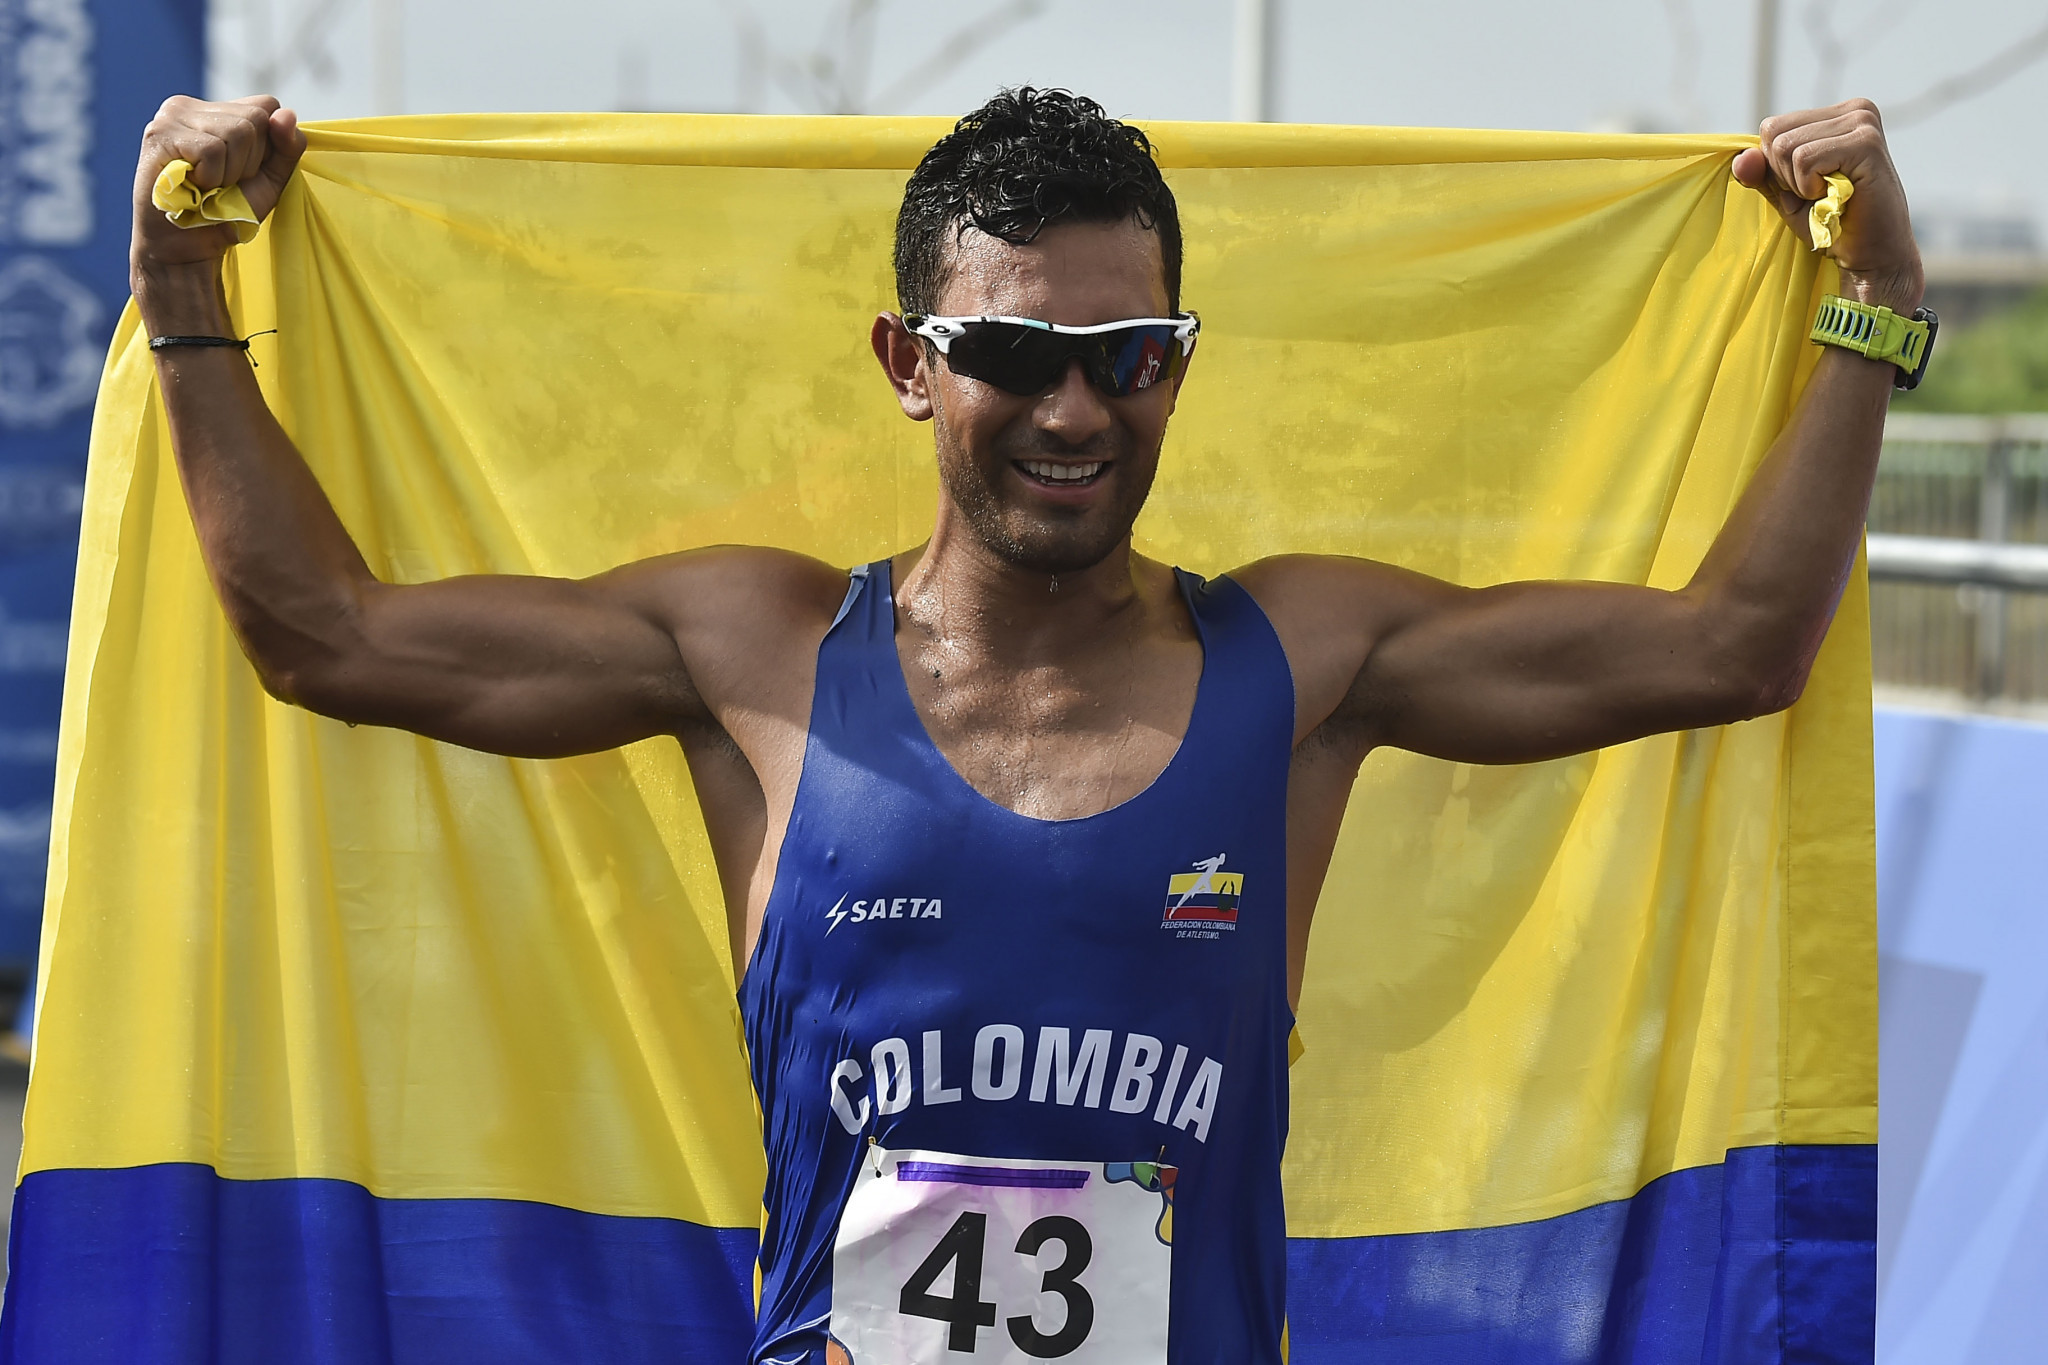 Eider Arevalo won the men's event for Colombia ©Getty Images